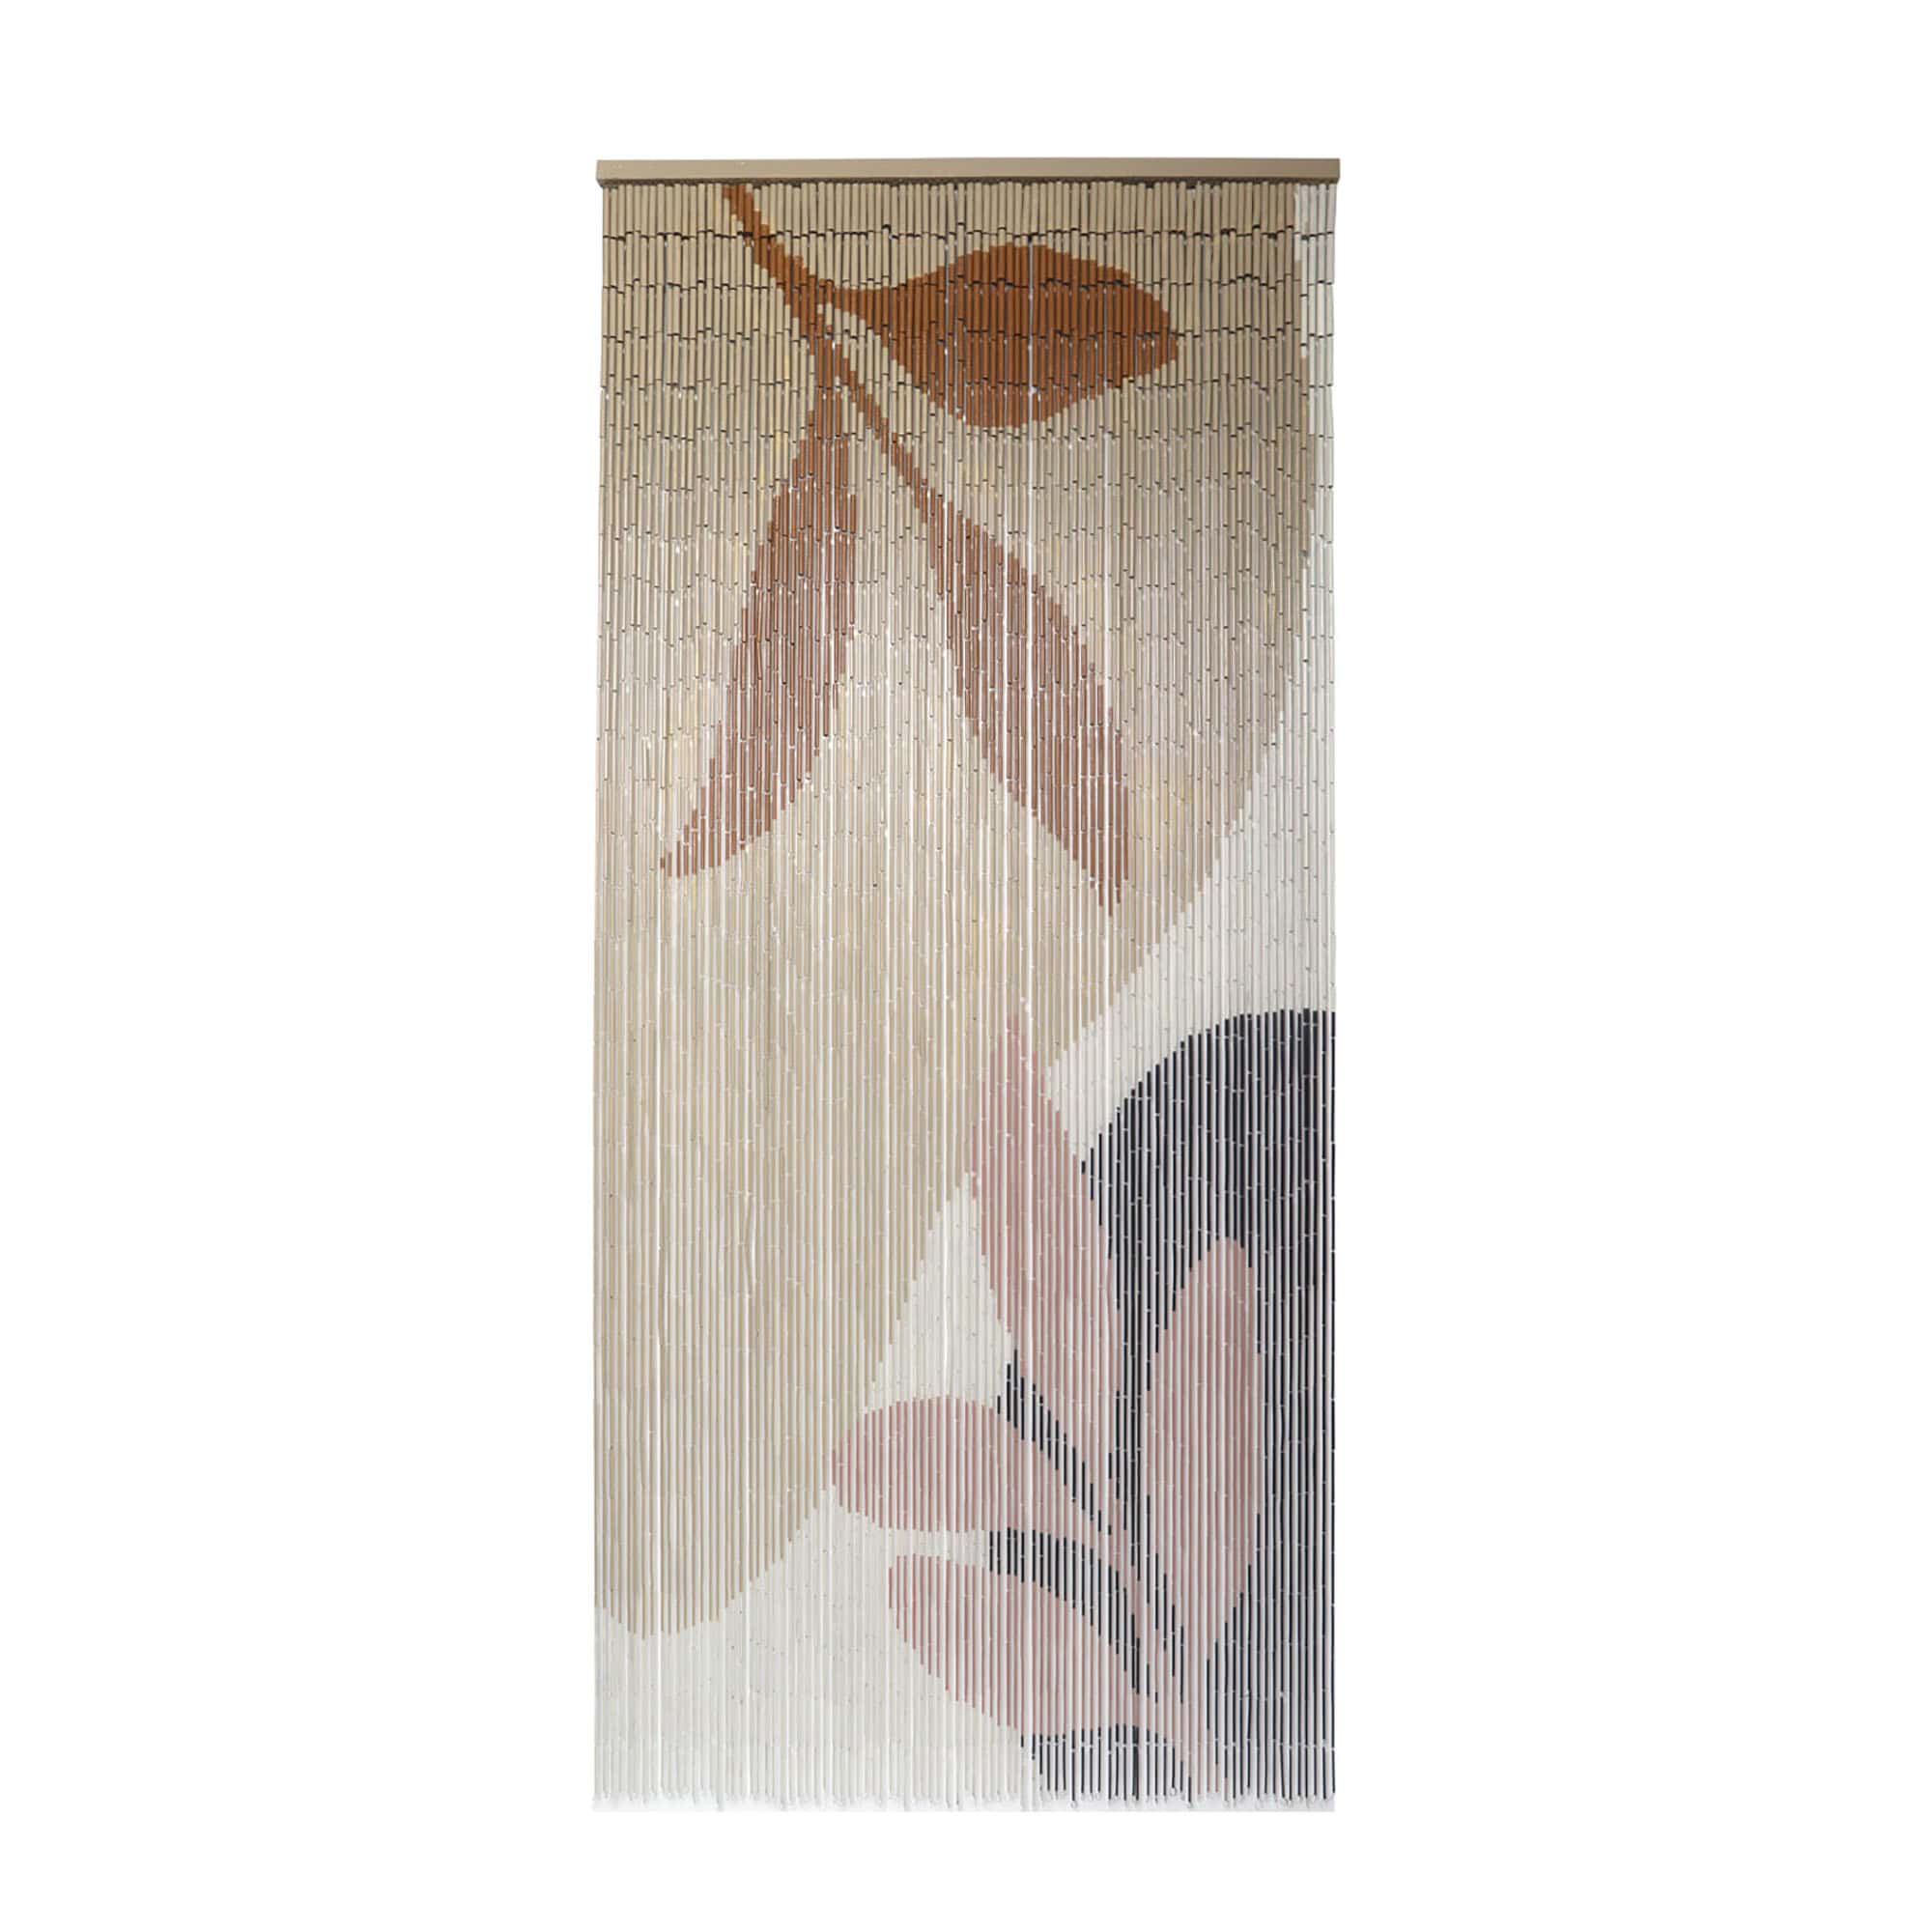 picture of a decorative bamboo door curtain with foliage design in beige and brown colors